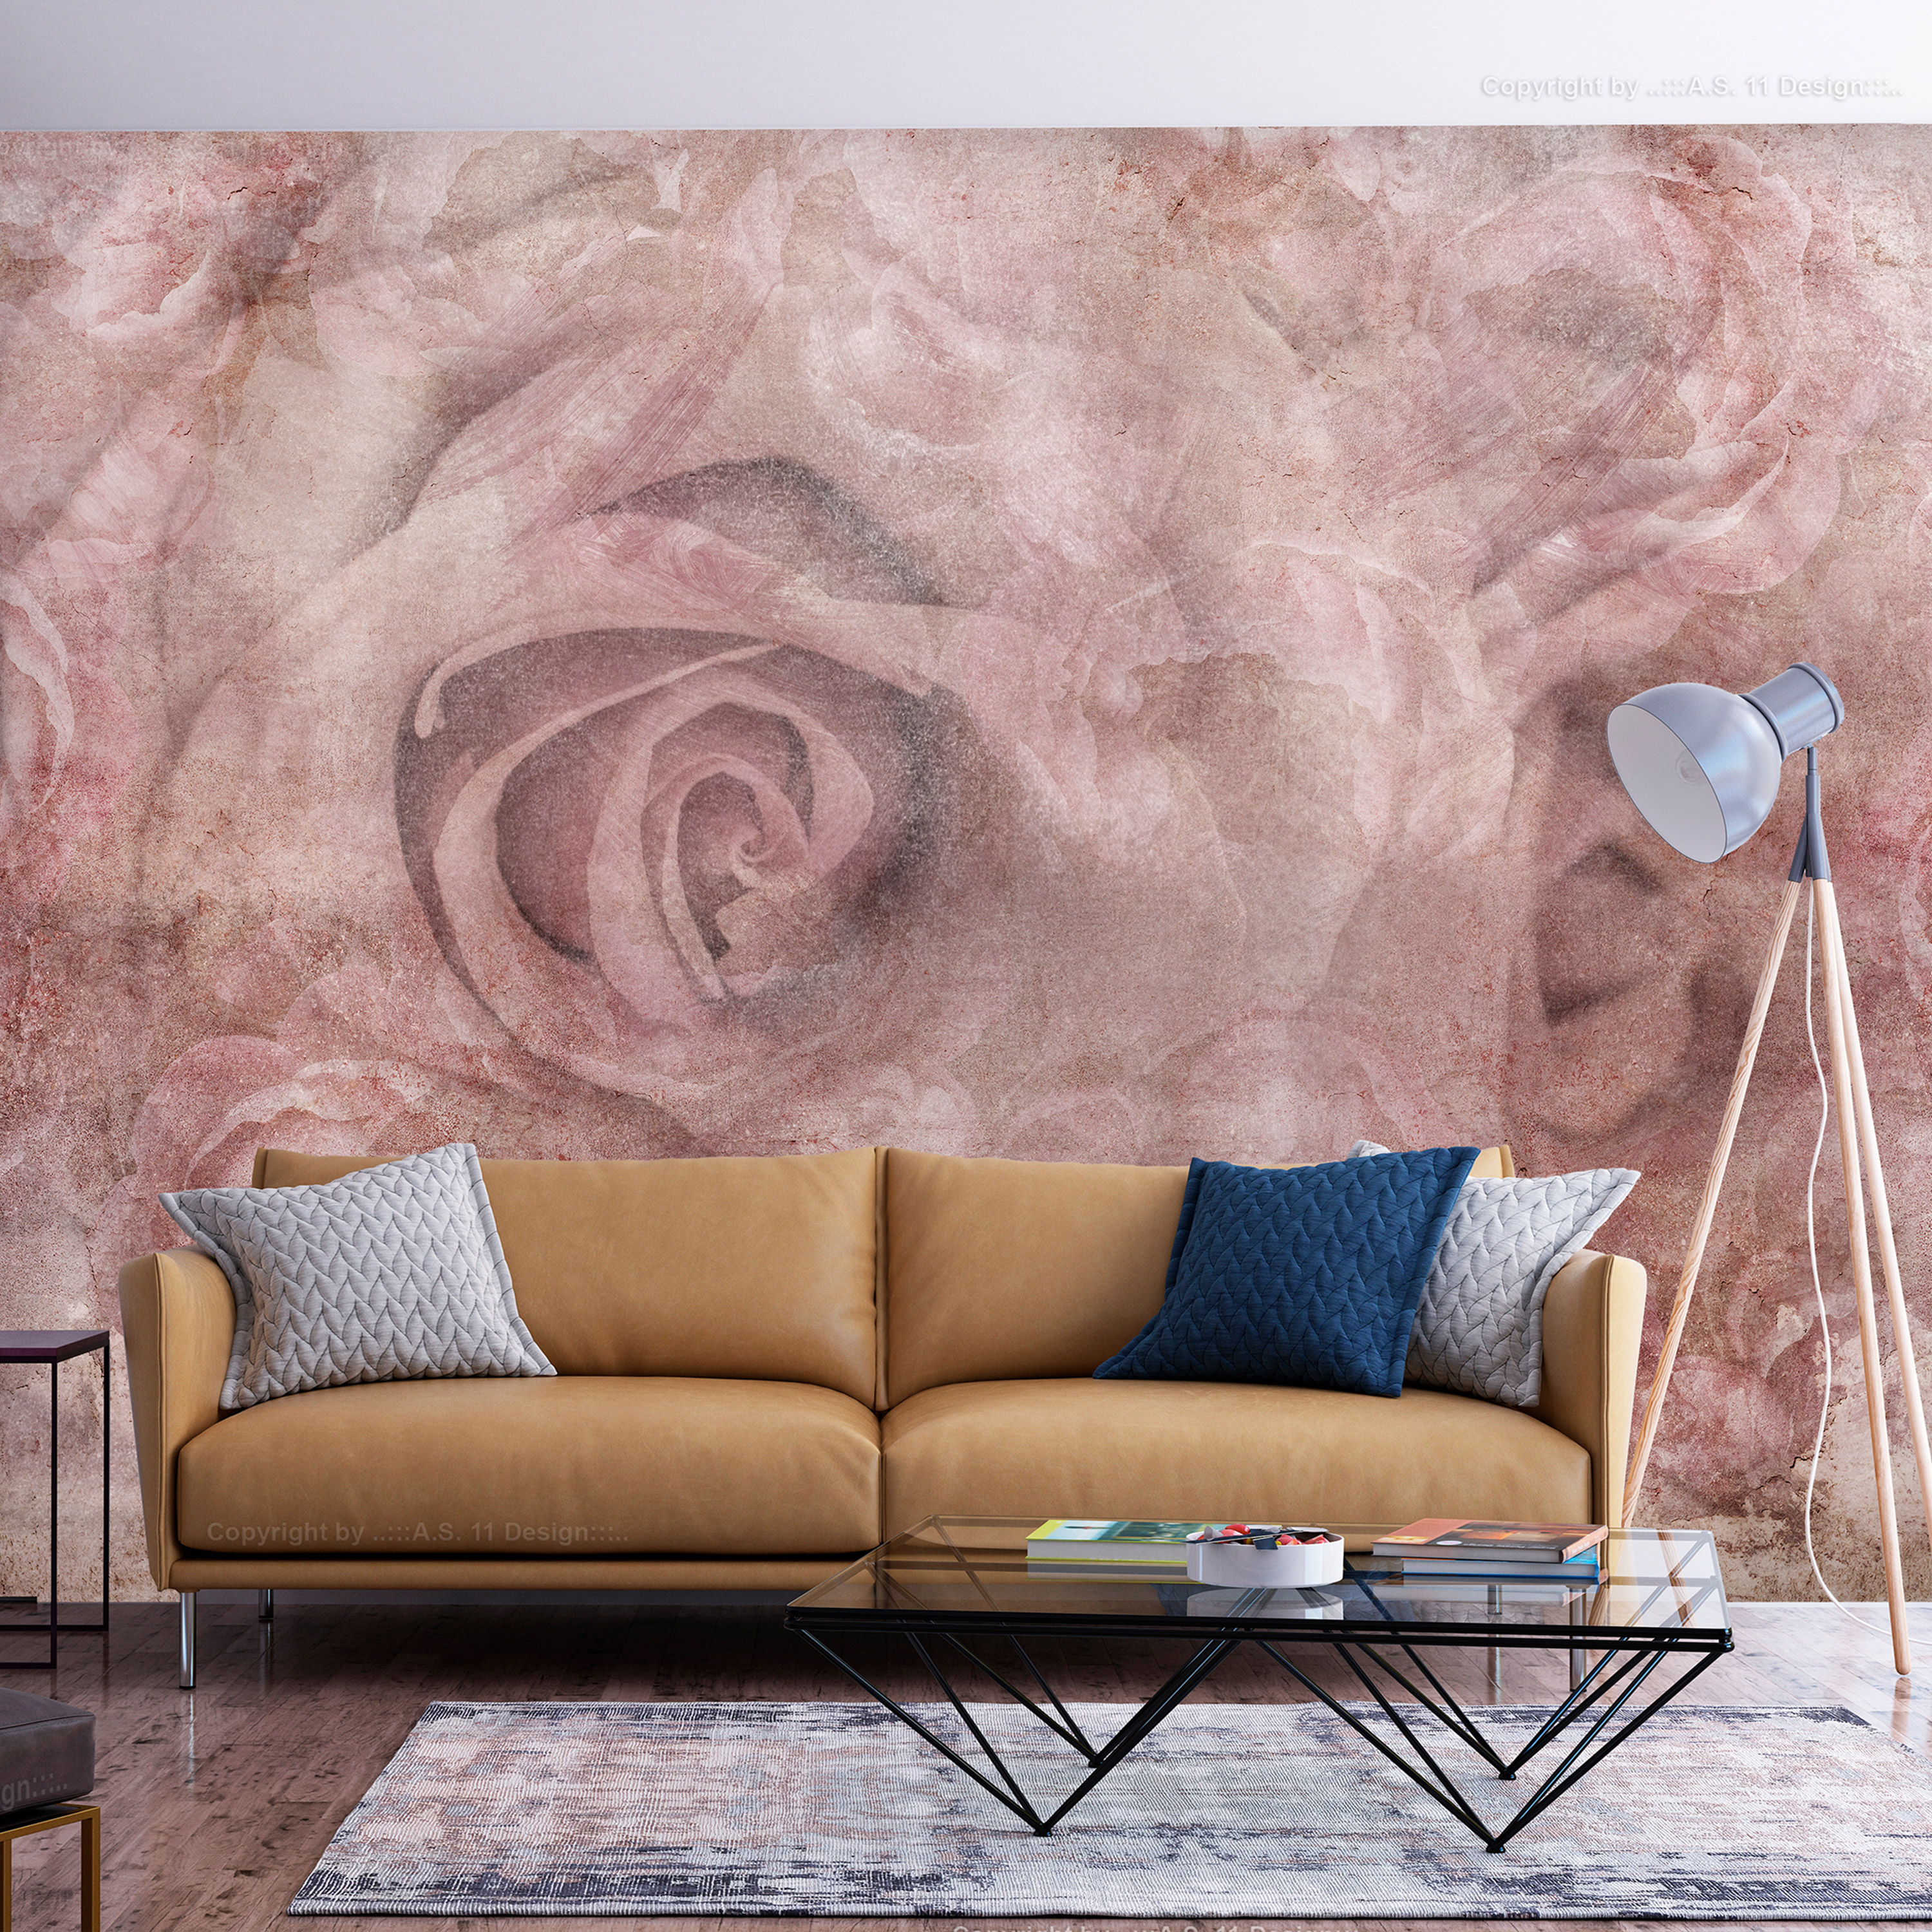 Self-adhesive Wallpaper - Pink Thoughts - 441x315